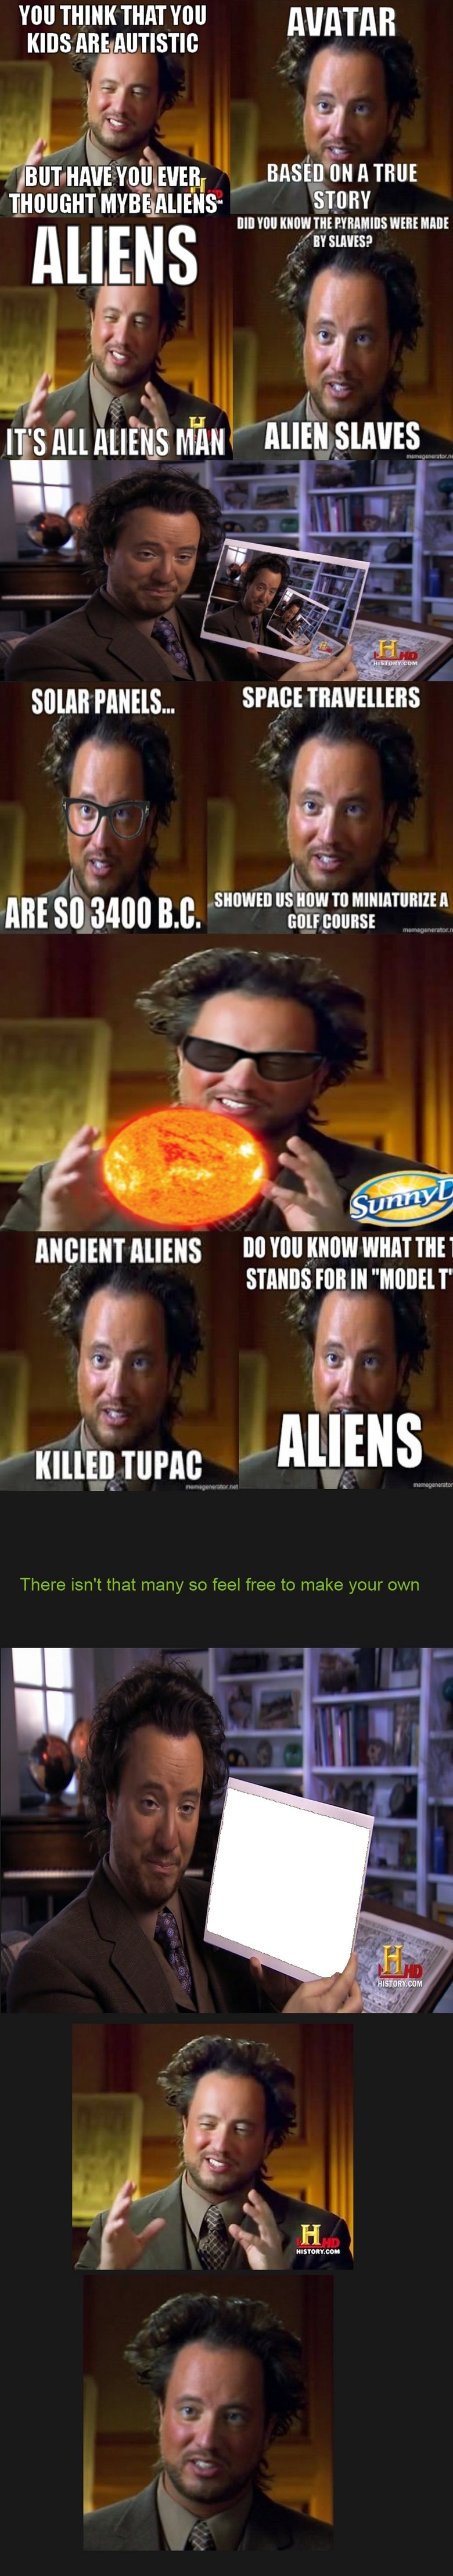 Ancient Aliens Comp. I feel like this meme has potential. Hg k stow IT' S All Alums MAN x AMEN SIMS by if Rall KNEW WHAT THE i swans Hill Ill "MIMI T" um H. good work